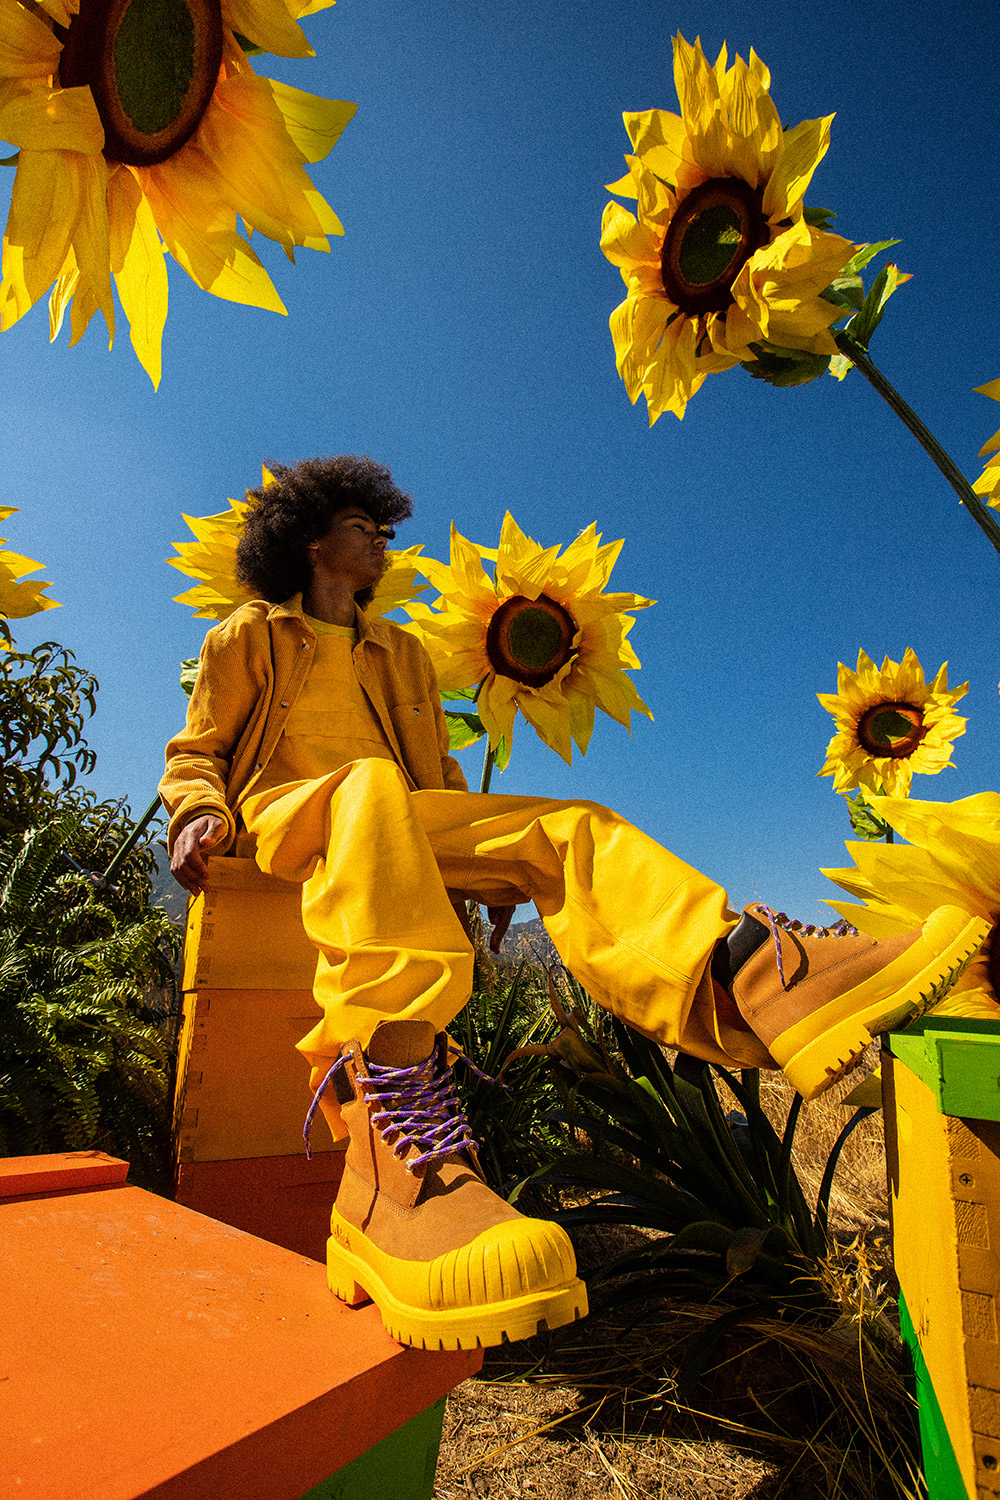 Timberland and Bee Line Bring a Pop Art Palette to Rugged Workwear